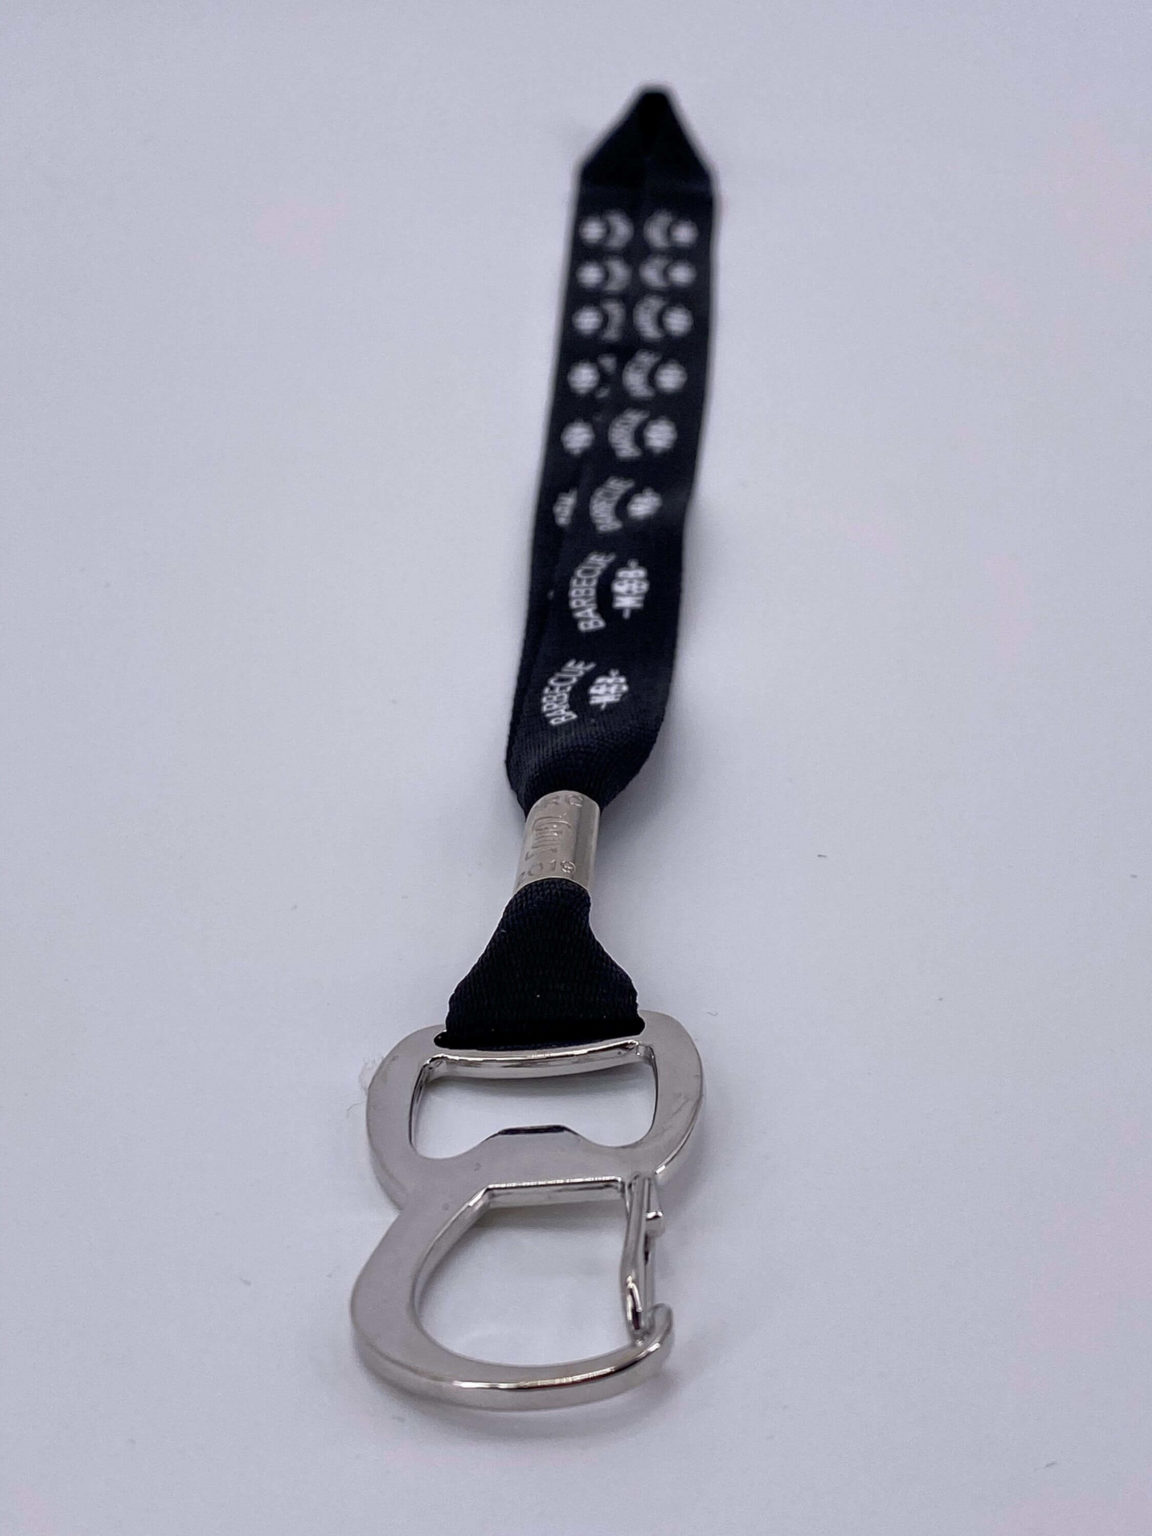 BBQ MOB Lanyard With Bottle Opener - Barbecue Mob